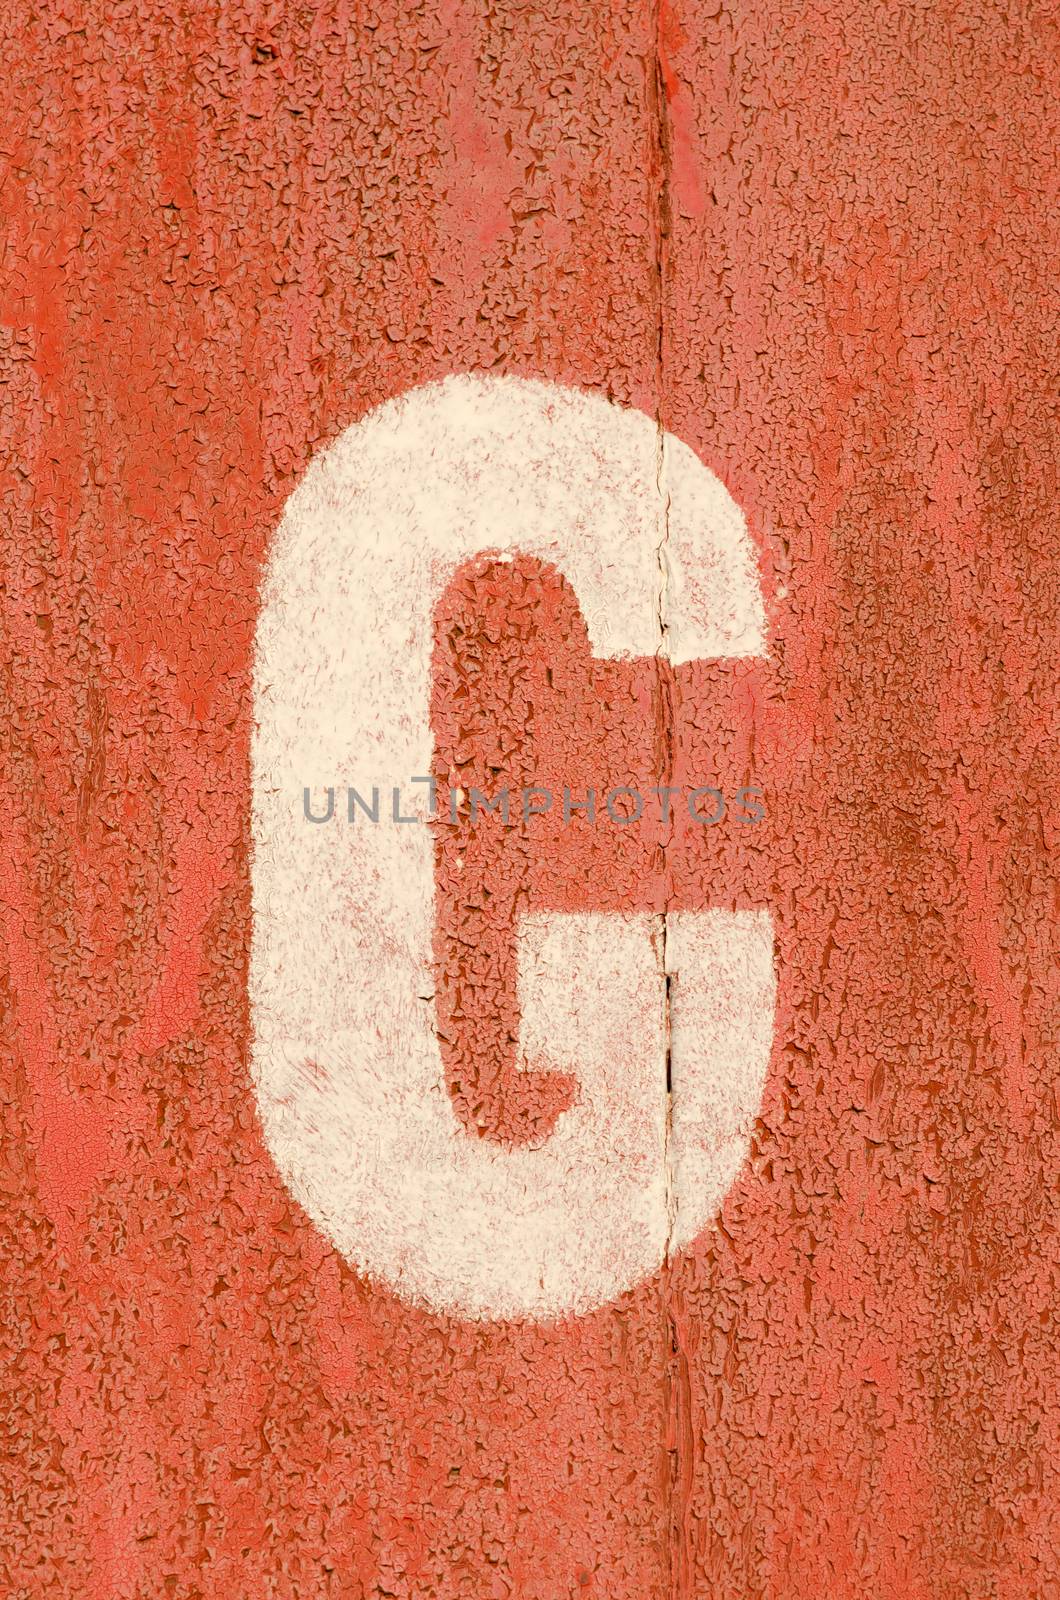 Letter painted on old rusty iron wall of garage.